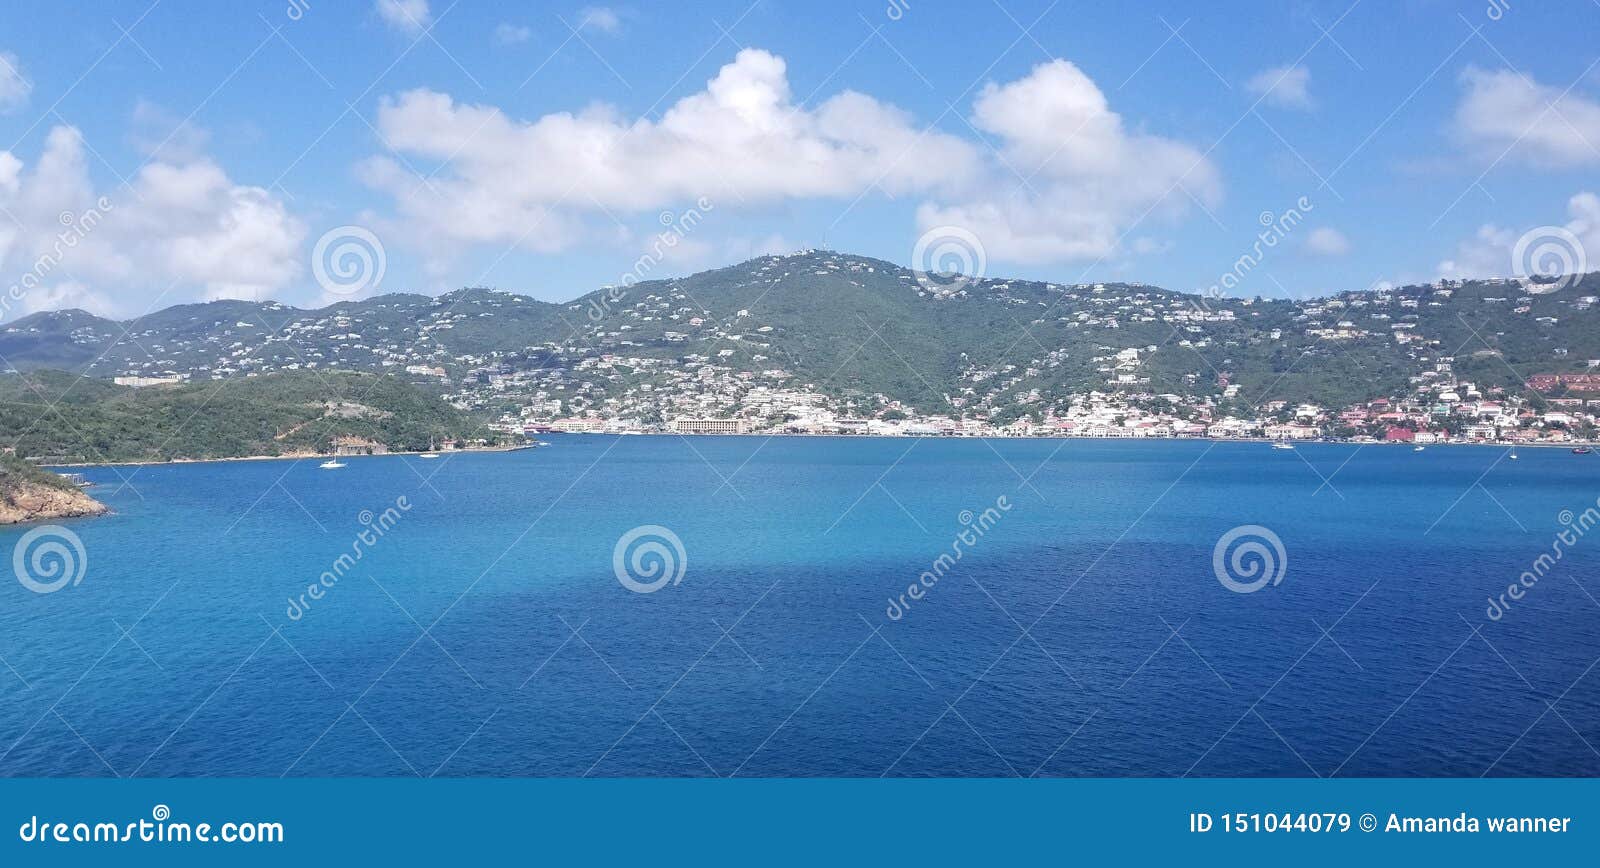 island of st. thomas coming into port